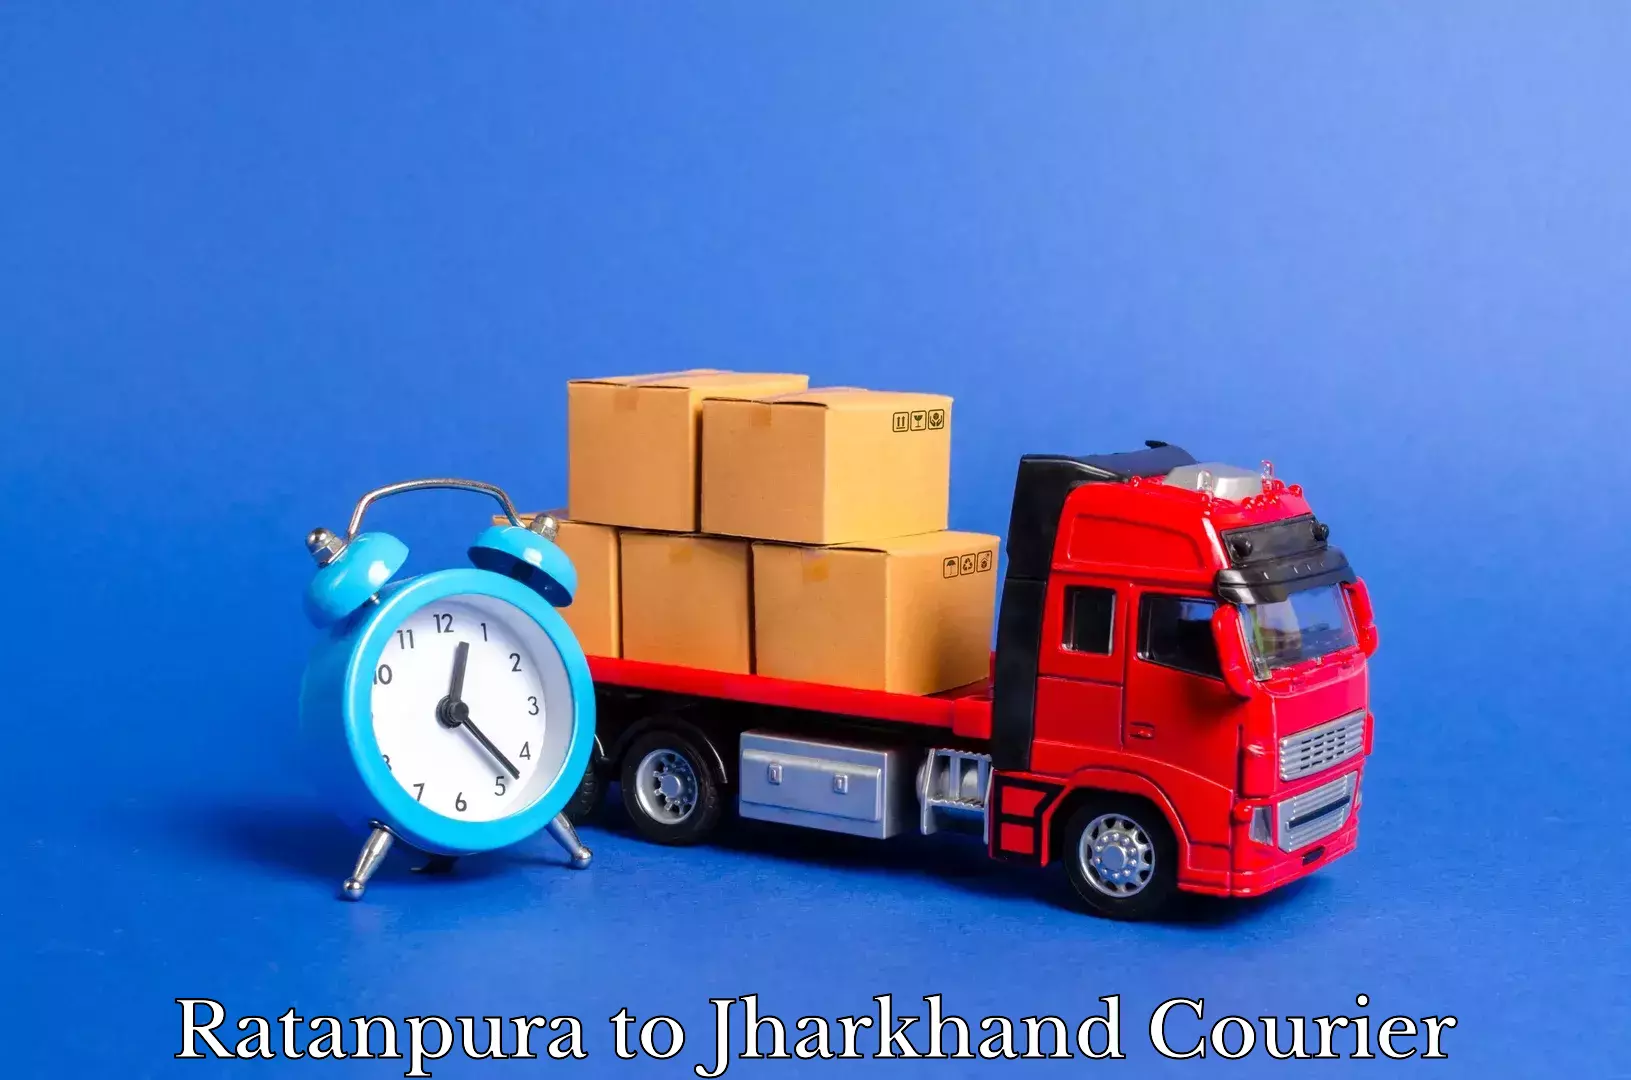 Professional packing services Ratanpura to Ramgarh